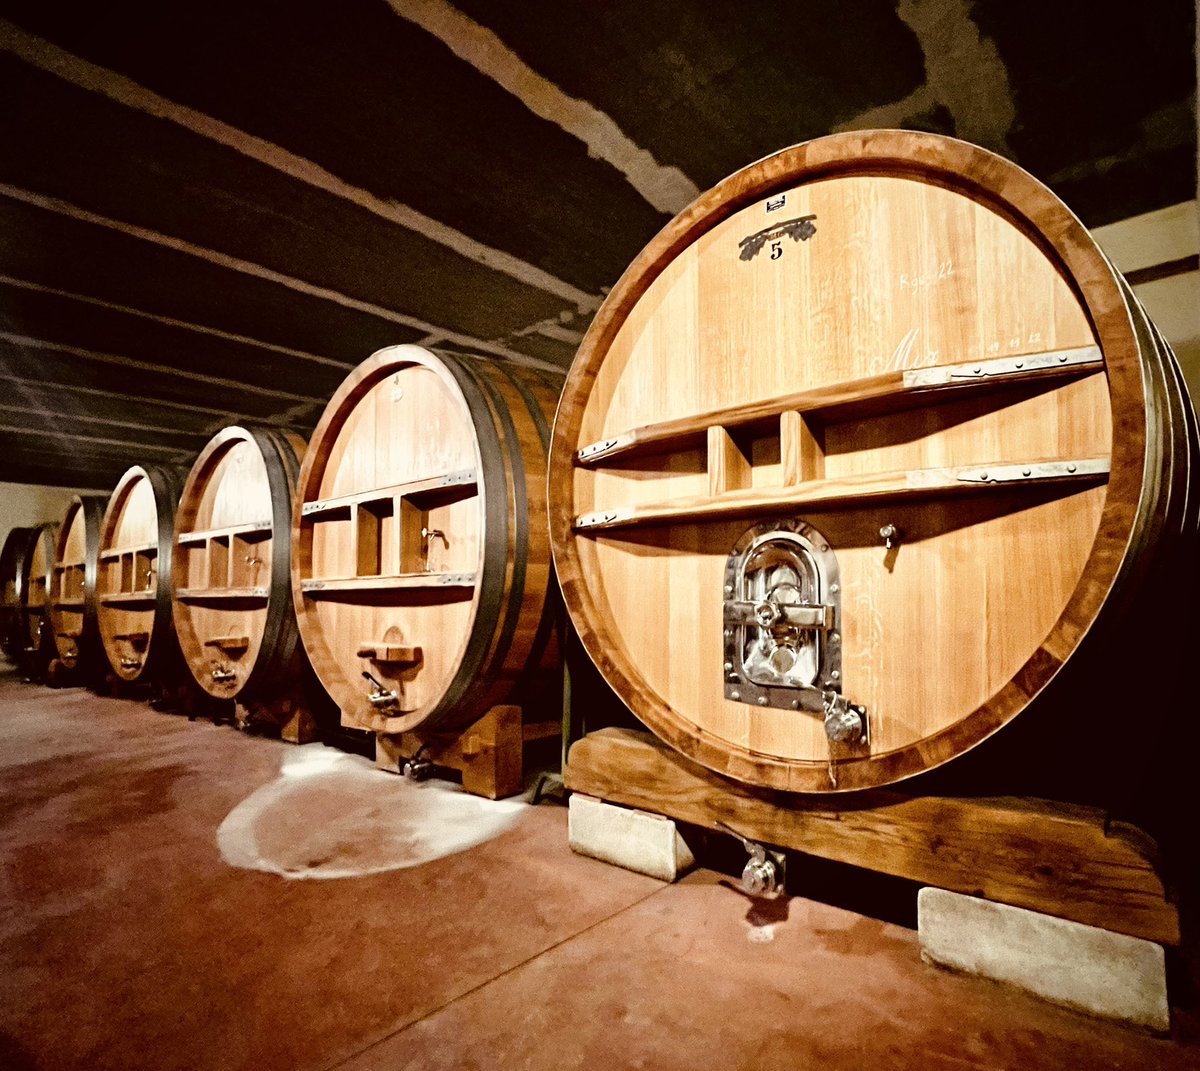 Some things are worth waiting for…..and wine🍷 not?   

#redblends #cotedazur #bandol #frenchwines #france #winery #vineyard #redwine #grapes #chateaudepibarnon #oakbarrels #fermenting